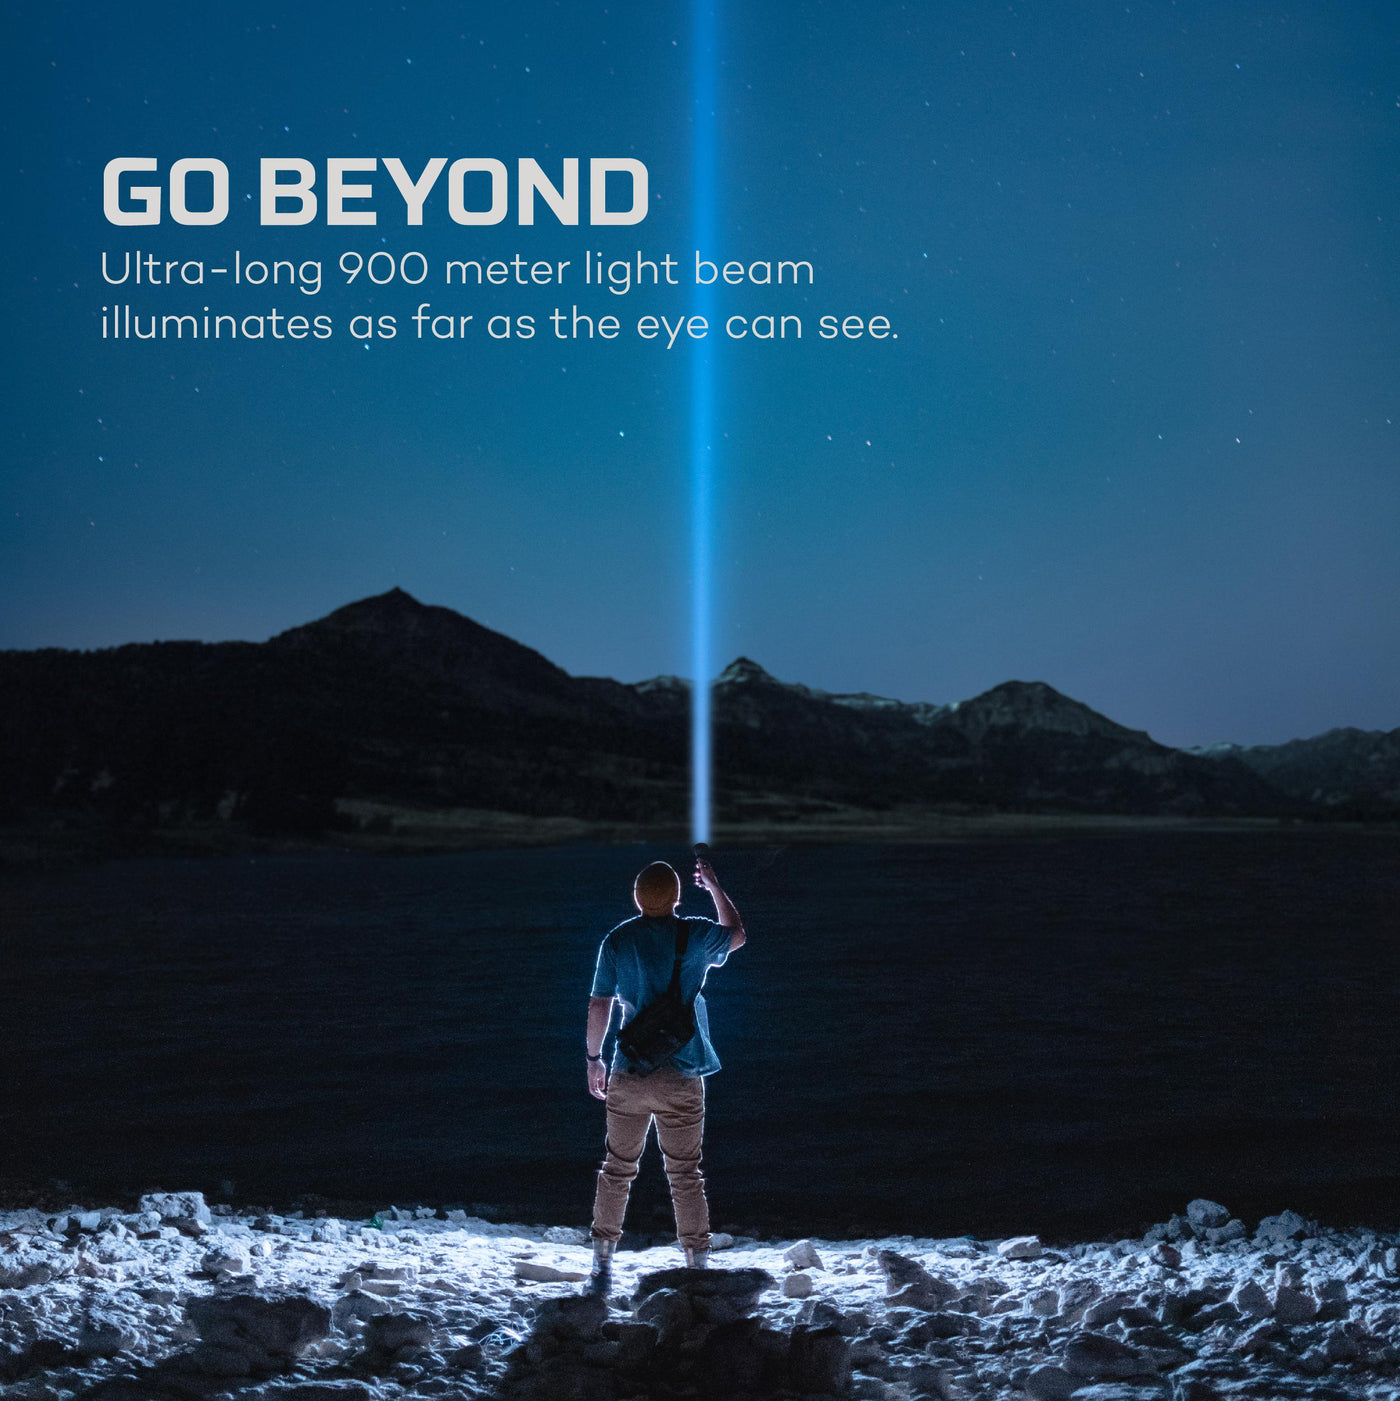 Nebo Luxtreme Half Mile Light Beam-HUNTING/OUTDOORS-Kevin's Fine Outdoor Gear & Apparel